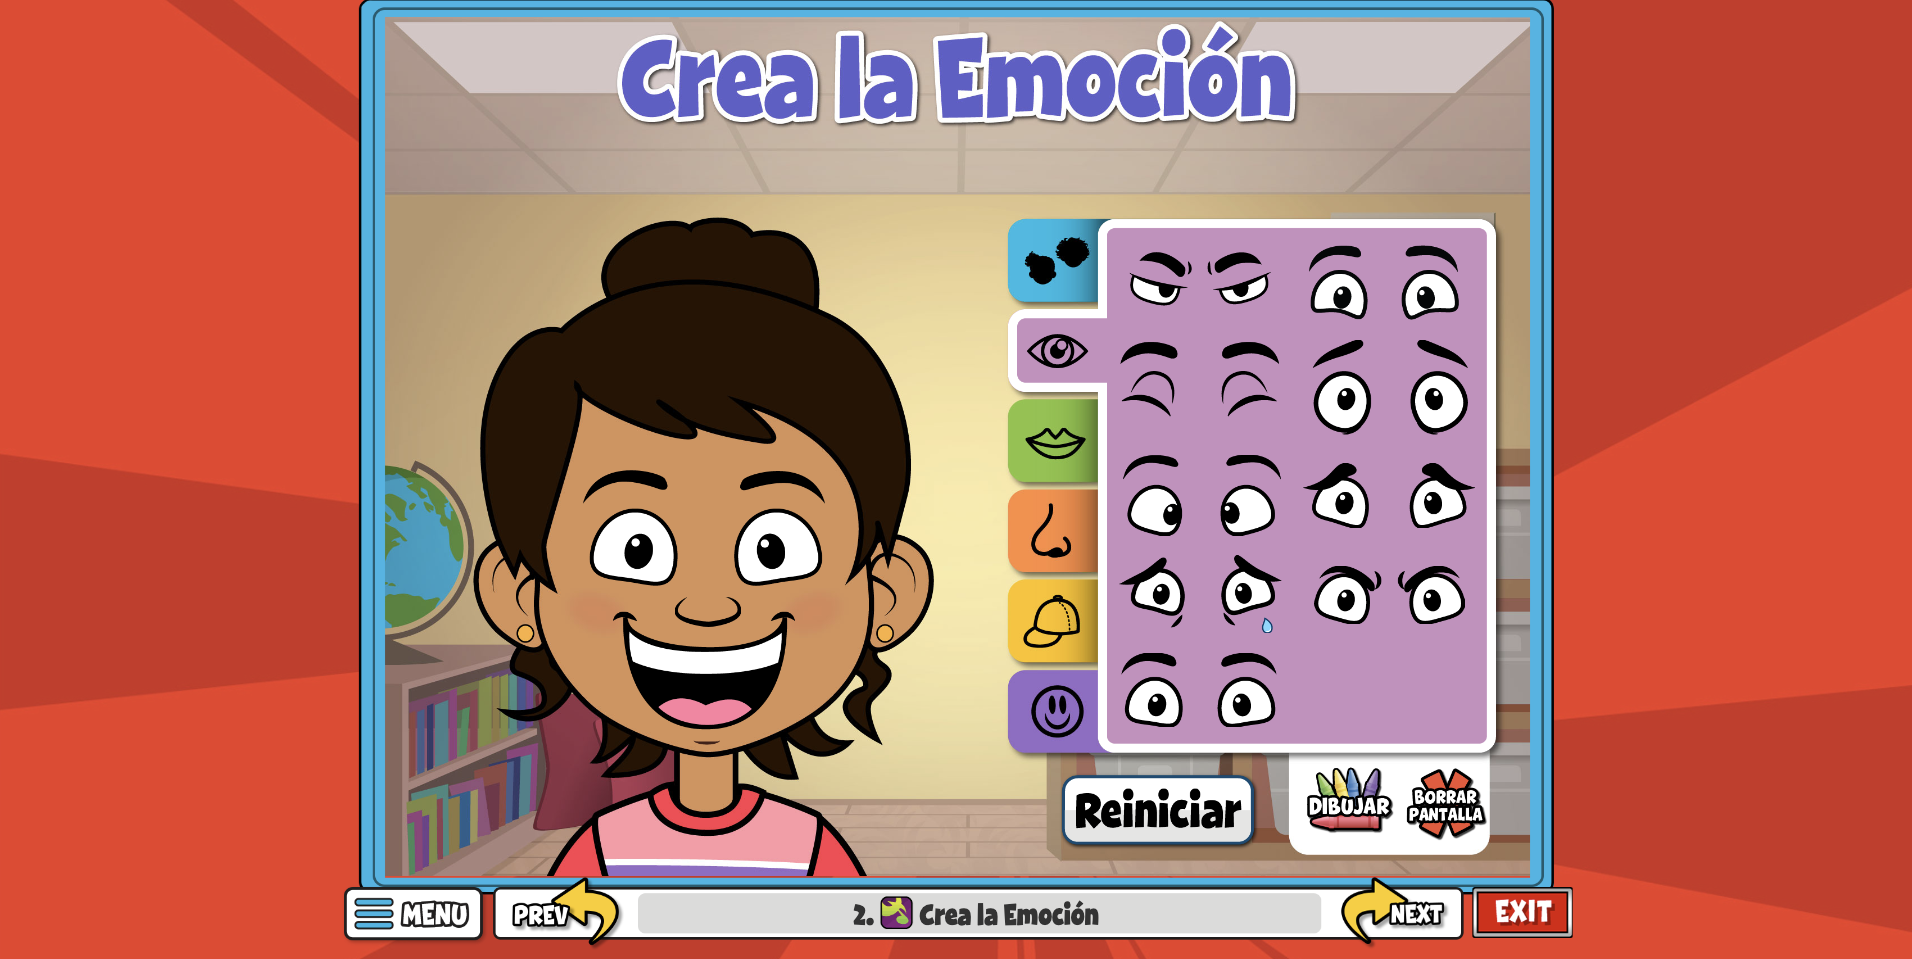 screen from crea la emocion showing an interactive where you can create characters with different emotional expressions.